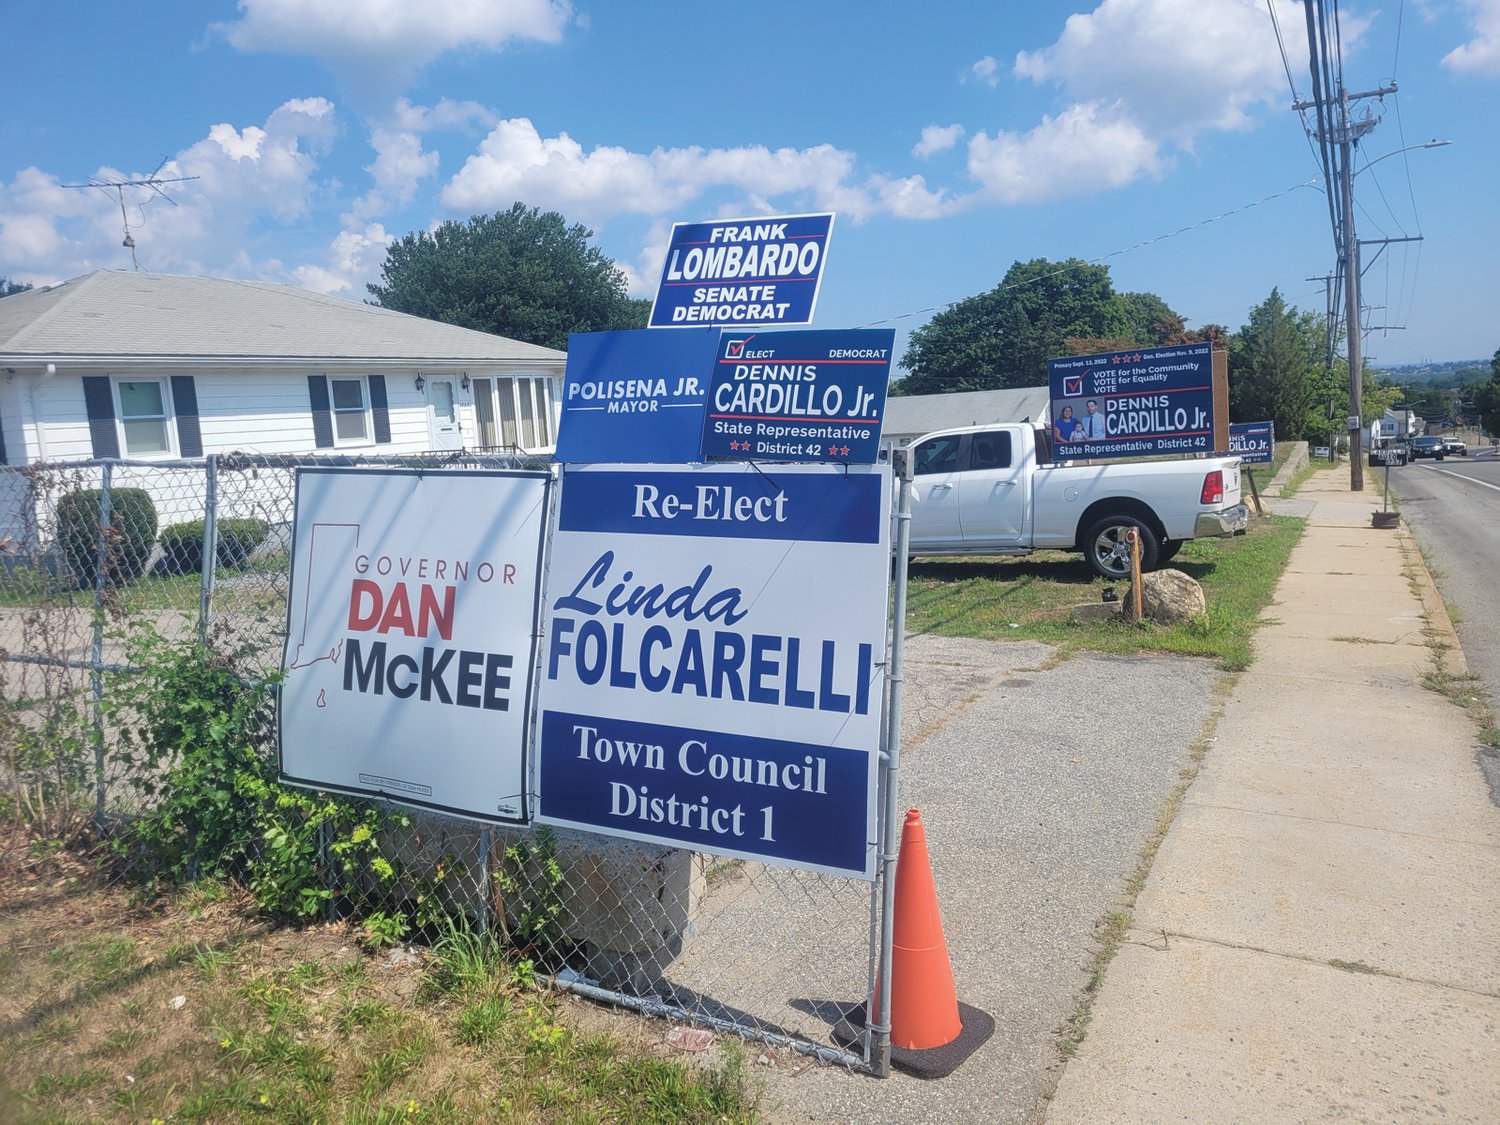 CAMPAIGN HQ? The incumbent state representative for District 42 (Cranston, Johnston), Rep. Ed Cardillo, alleges his nephew, Dennis Cardillo Jr., does not live at the address he provided on state election forms — 1757 Plainfield Pike. In fact, he alleges his nephew and opponent for the Democratic primary does not live within District 42. The home, which is also a commercial address, is occupied by the candidate’s father. The yard is packed with election signs.